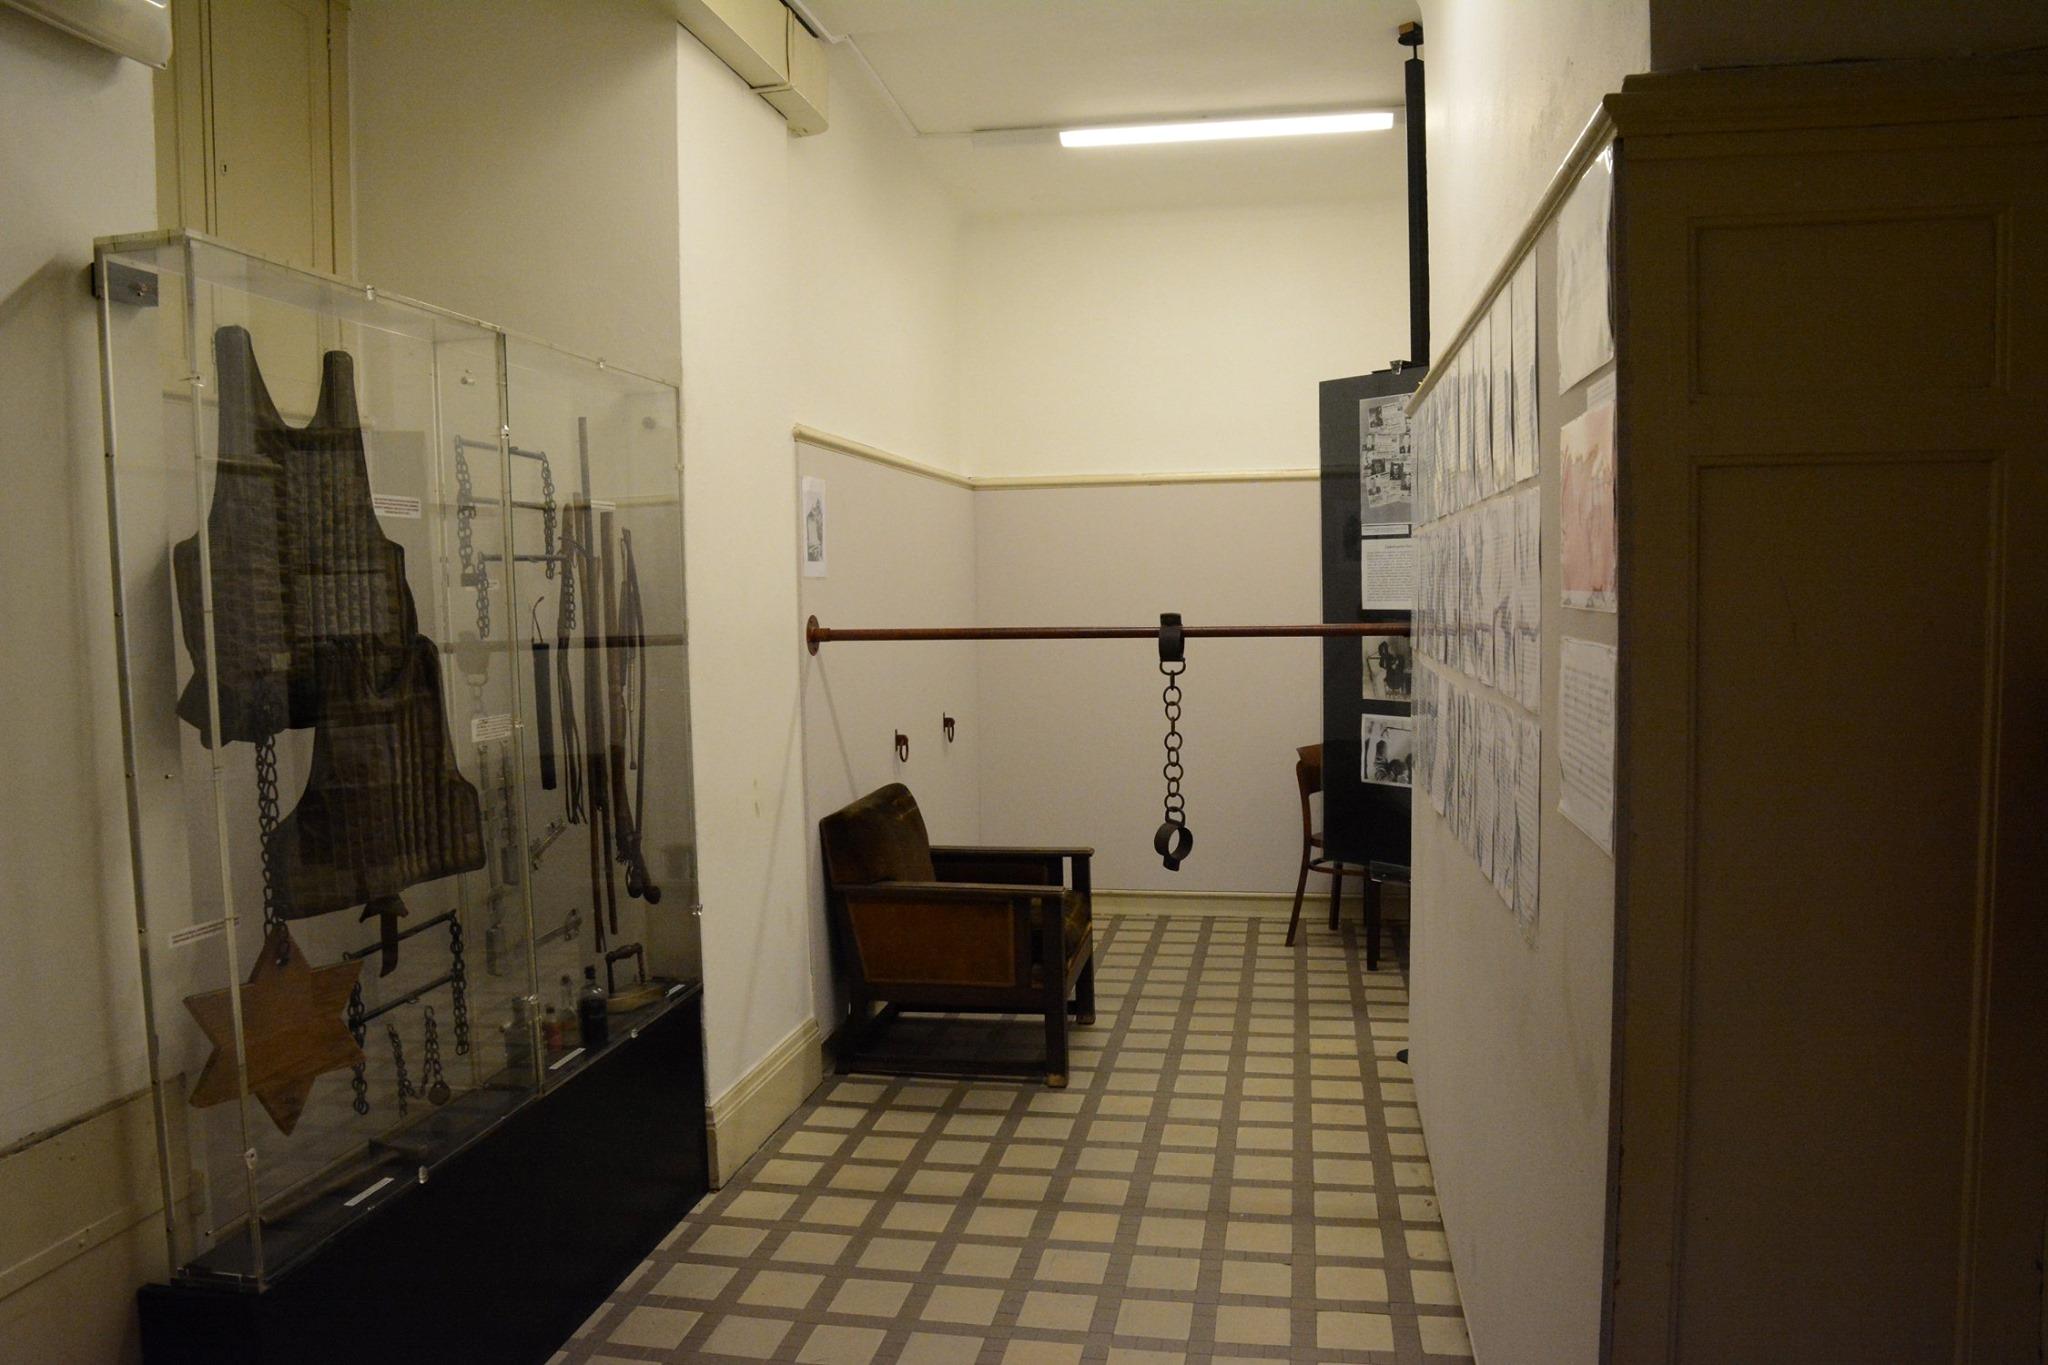 Guided-Tour-of-the-Gestapo-Headquarters-in-Prague-1